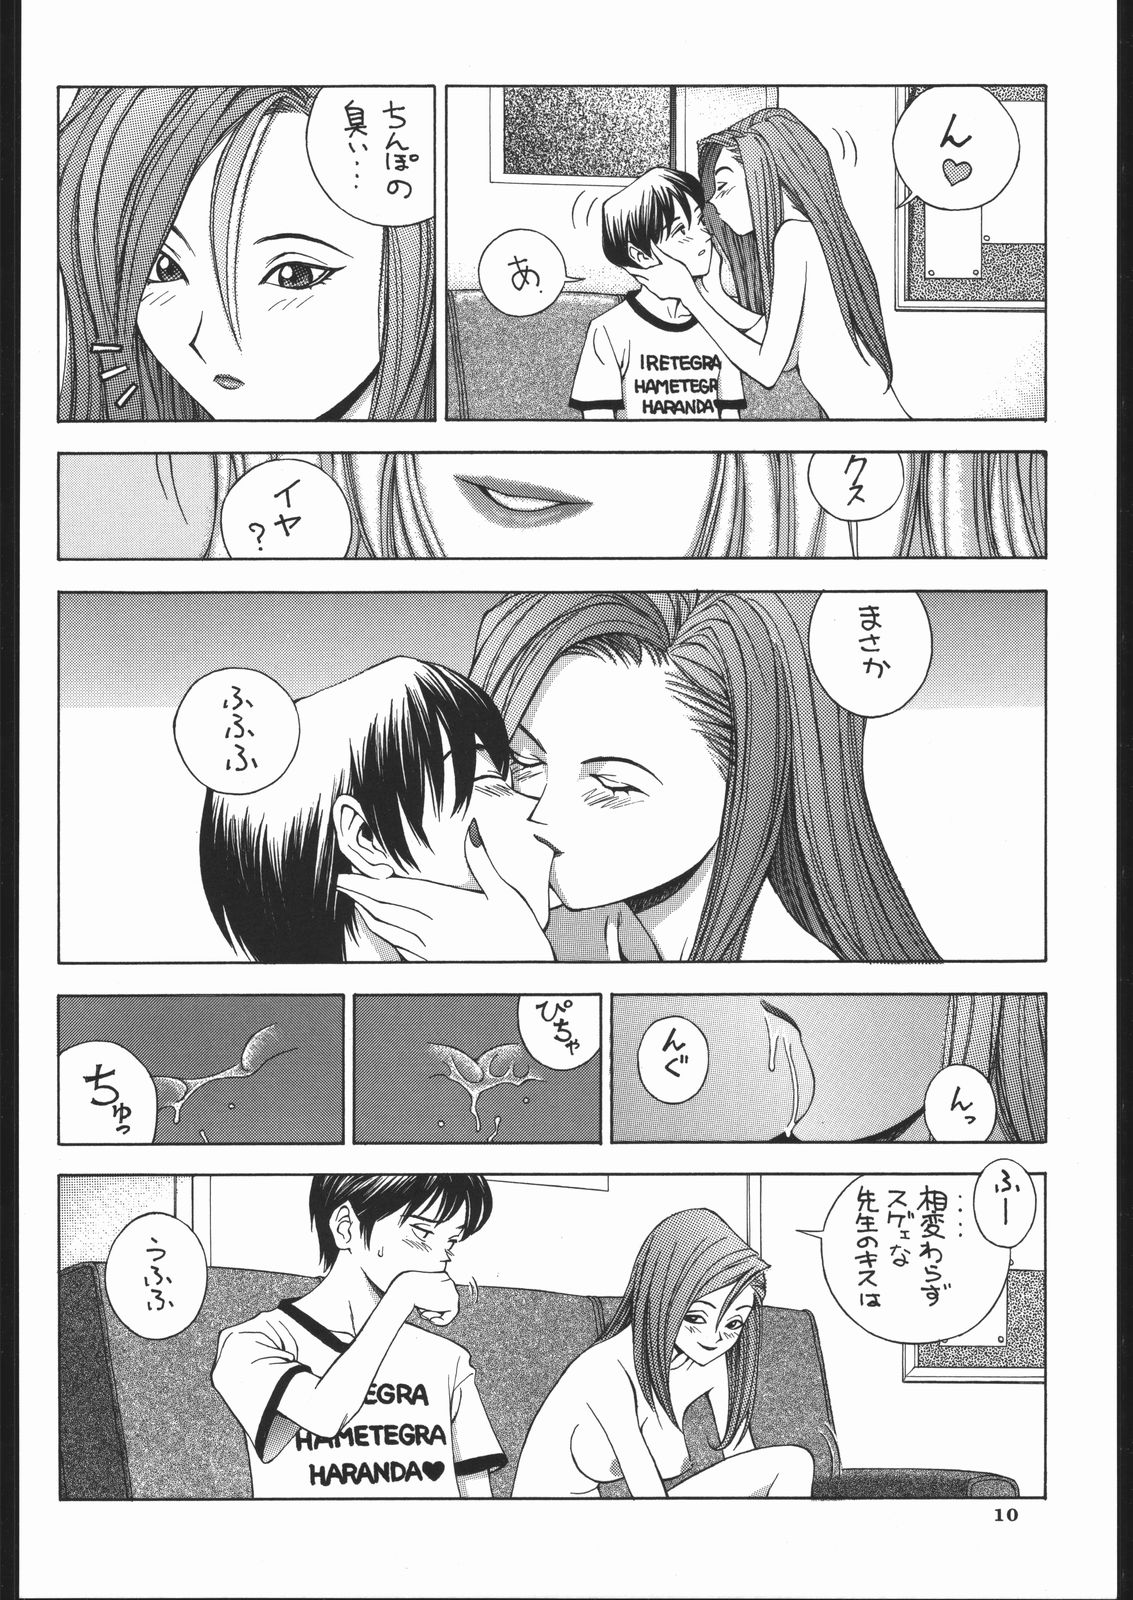 [PINK CAT'S GARDEN] SEXCEED ver.7.0 page 9 full